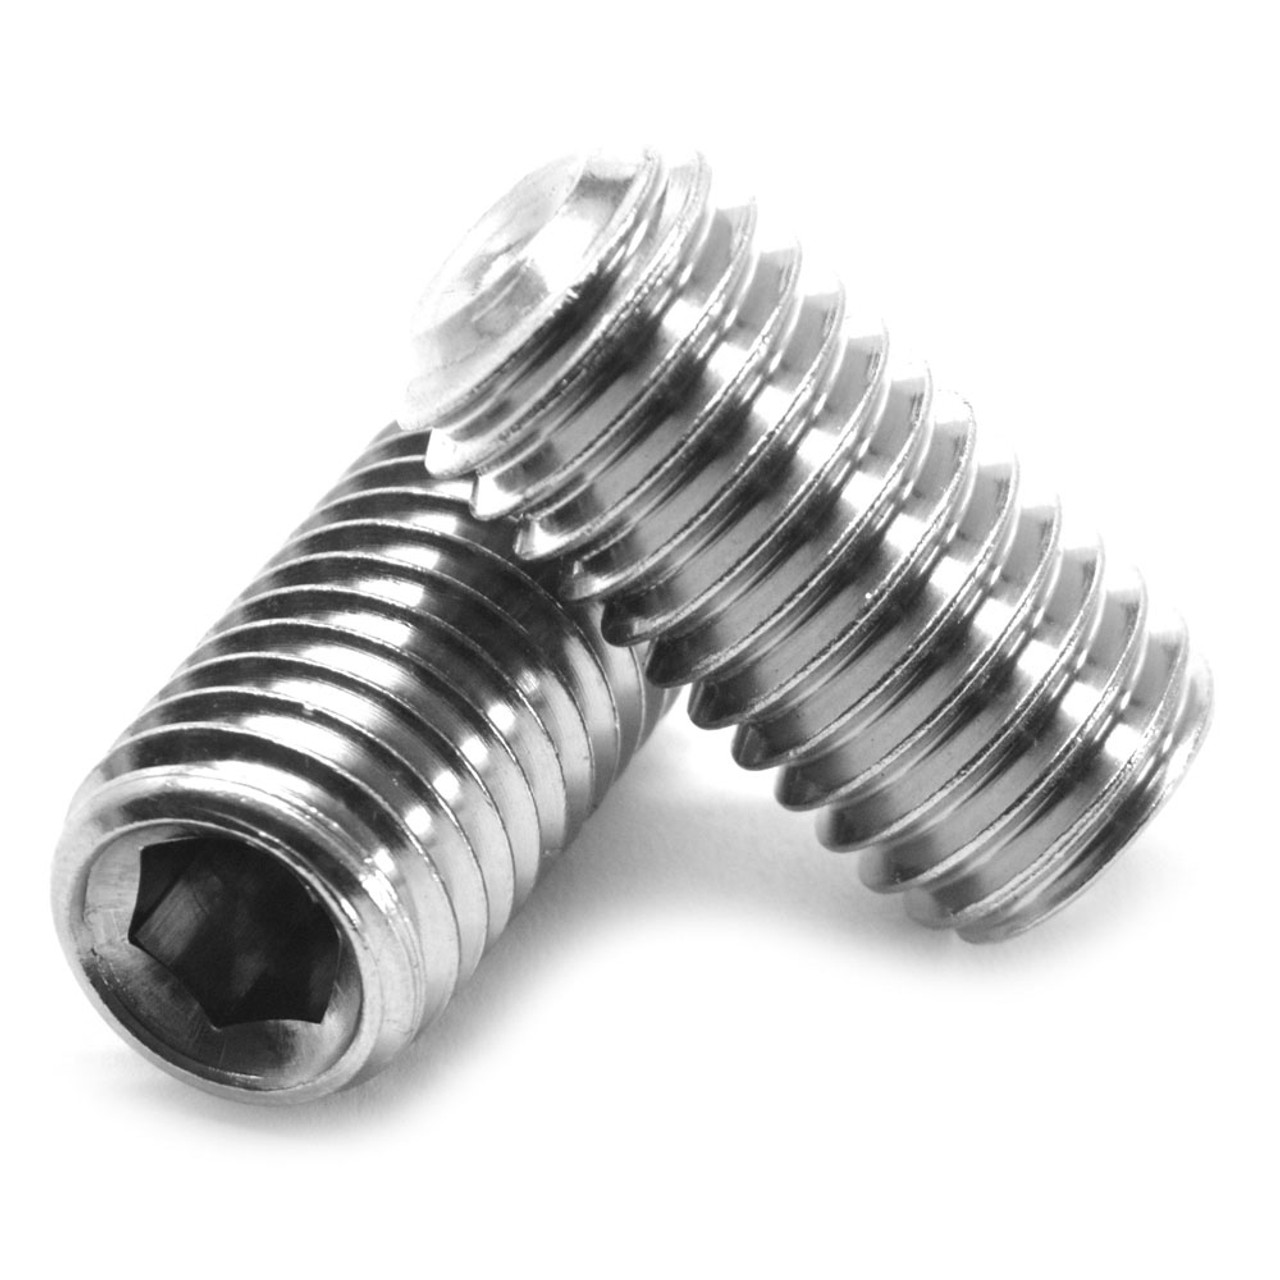 M12 x 1.75 x 35 MM Coarse Thread Socket Set Screw Cup Point Stainless Steel 18-8